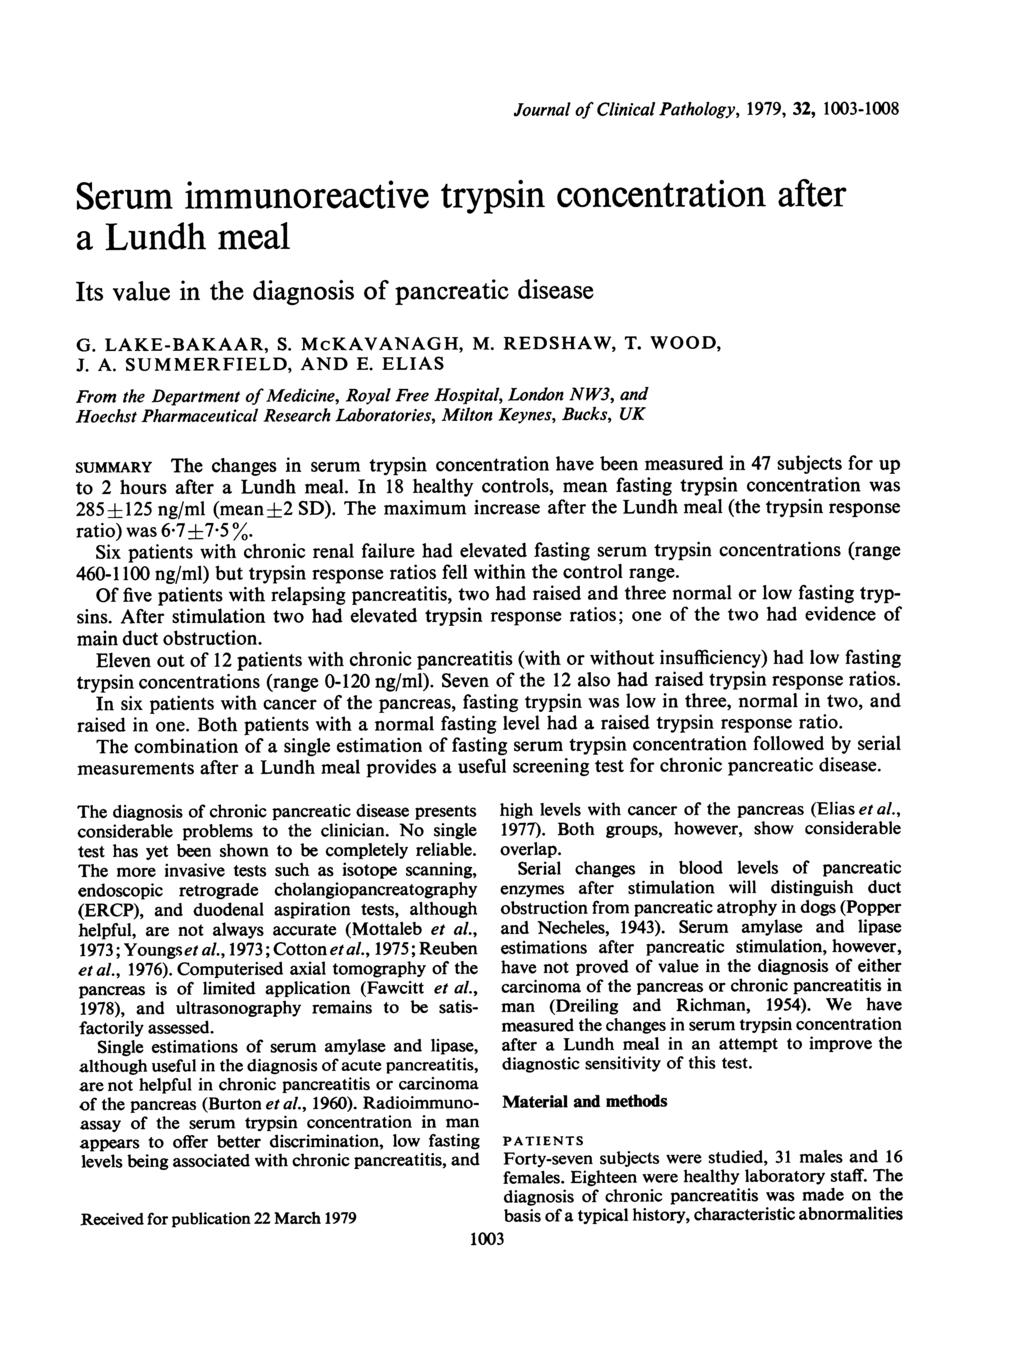 Journal of Clinical Pathology, 1979, 32, 1003-1008 Serum immunoreactive trypsin concentration after a Lundh meal Its value in the diagnosis of pancreatic disease G. LAKE-BAKAAR, S. McKAVANAGH, M.